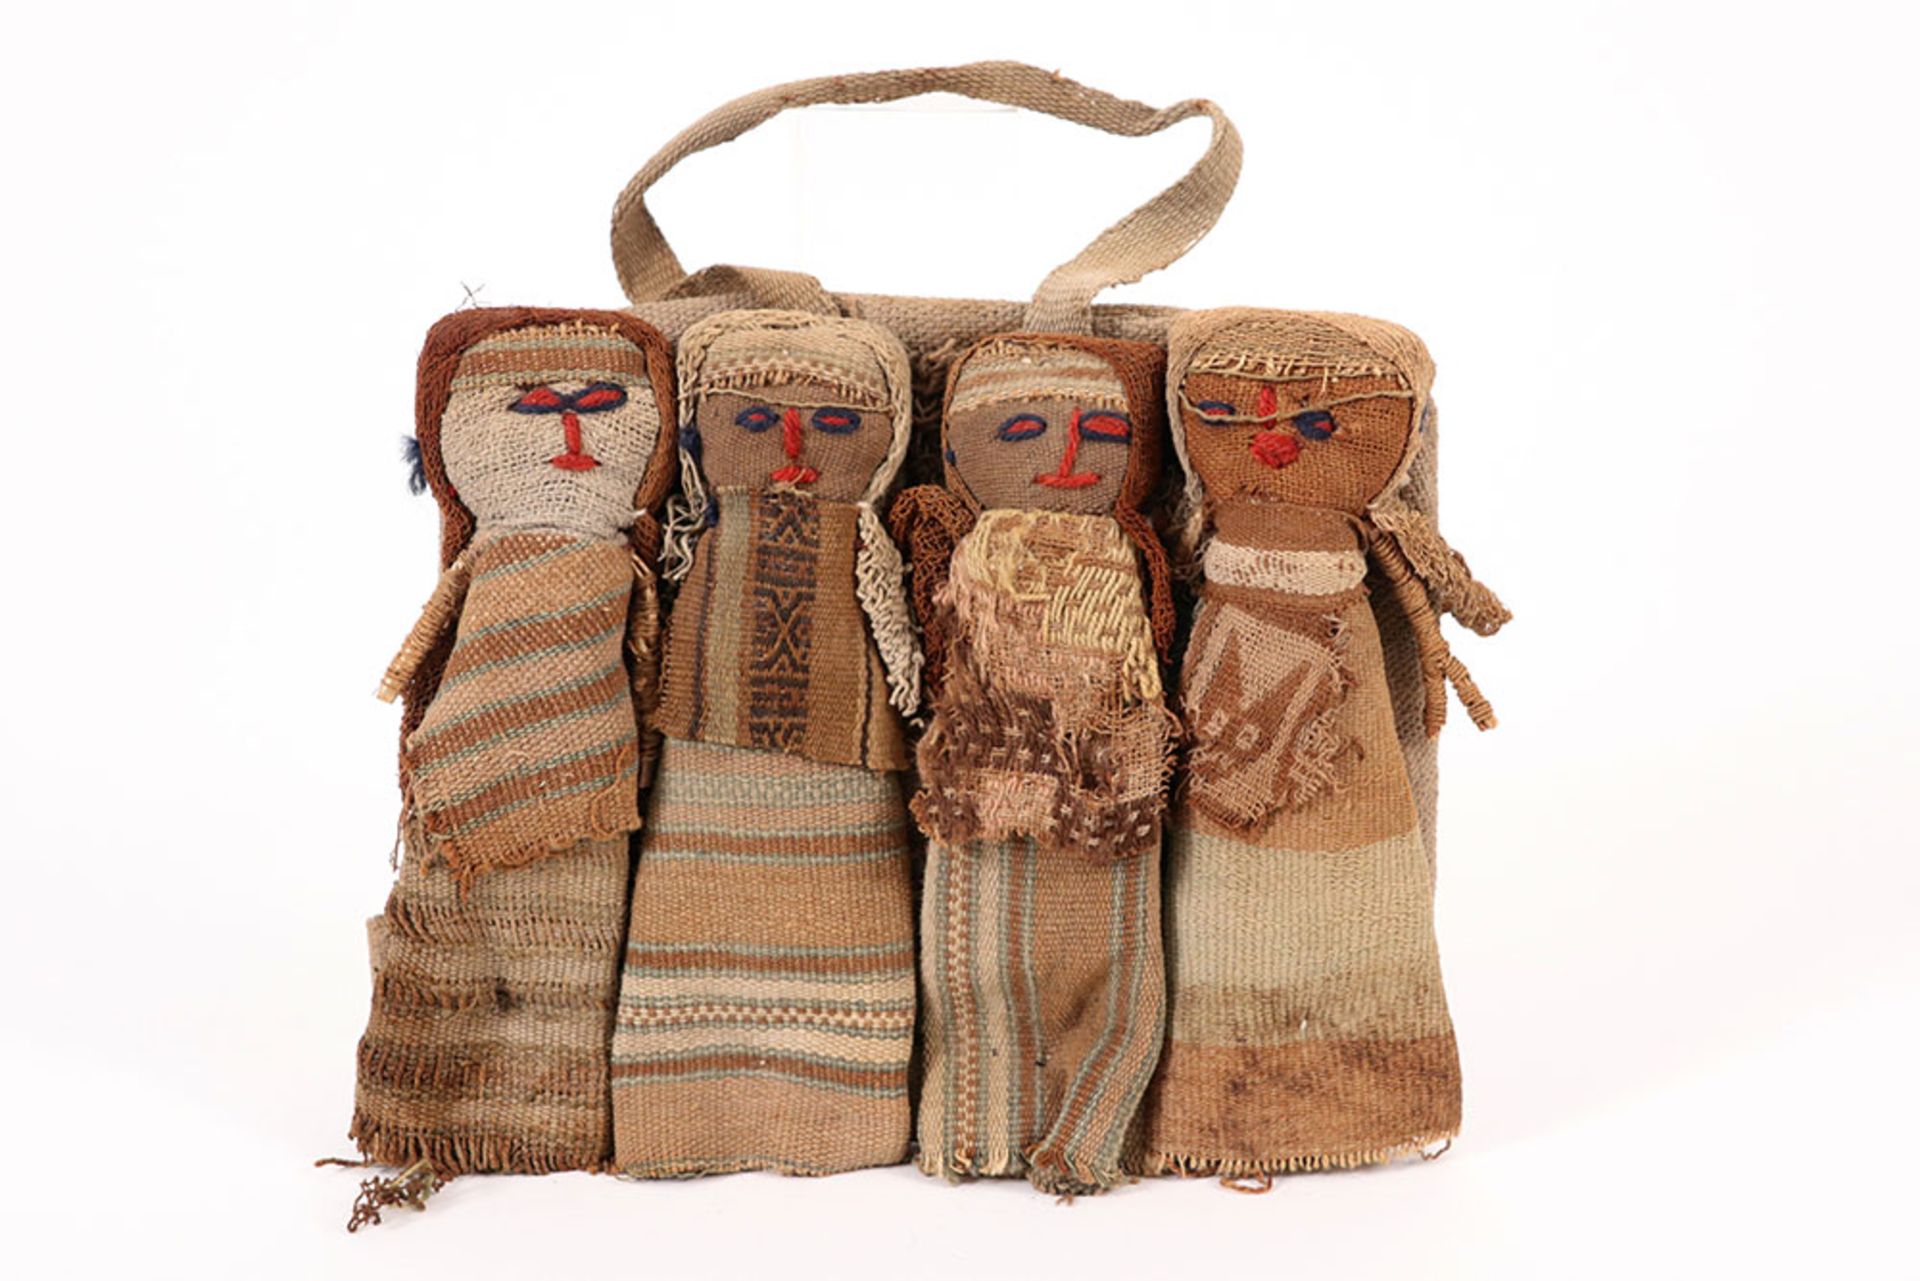 12th till 14th Cent. Peruvian Chancay Culture set of four dolls in typical Chancay textile with